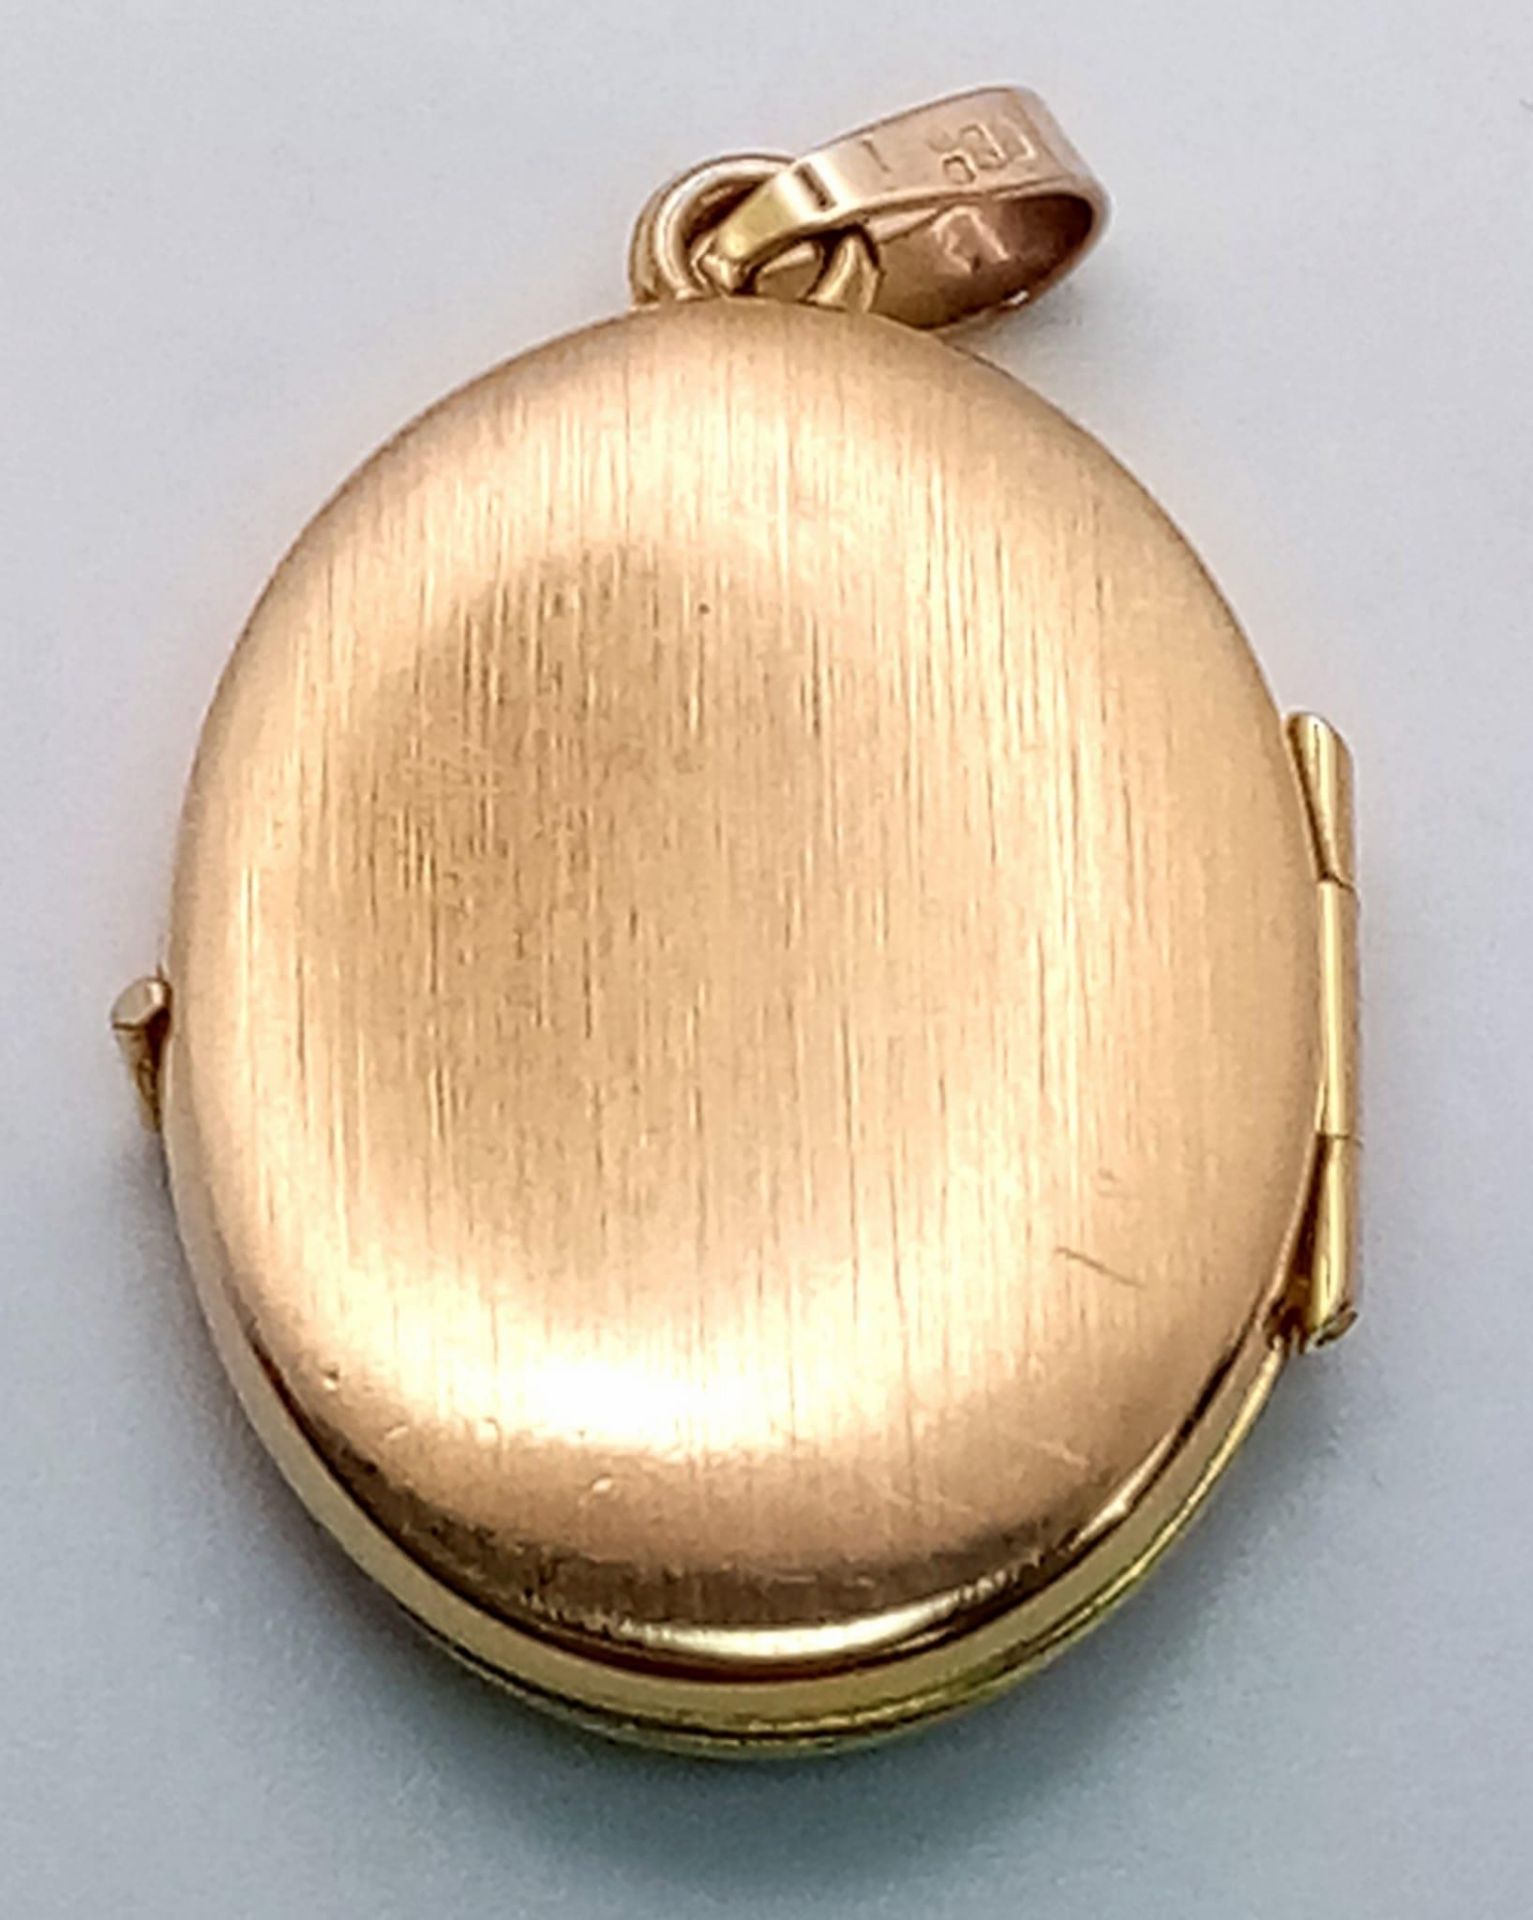 A 9K Yellow Gold Oval Locket Pendant. Decorative white gold floral scene. 3cm. 2.2g weight. - Image 3 of 5